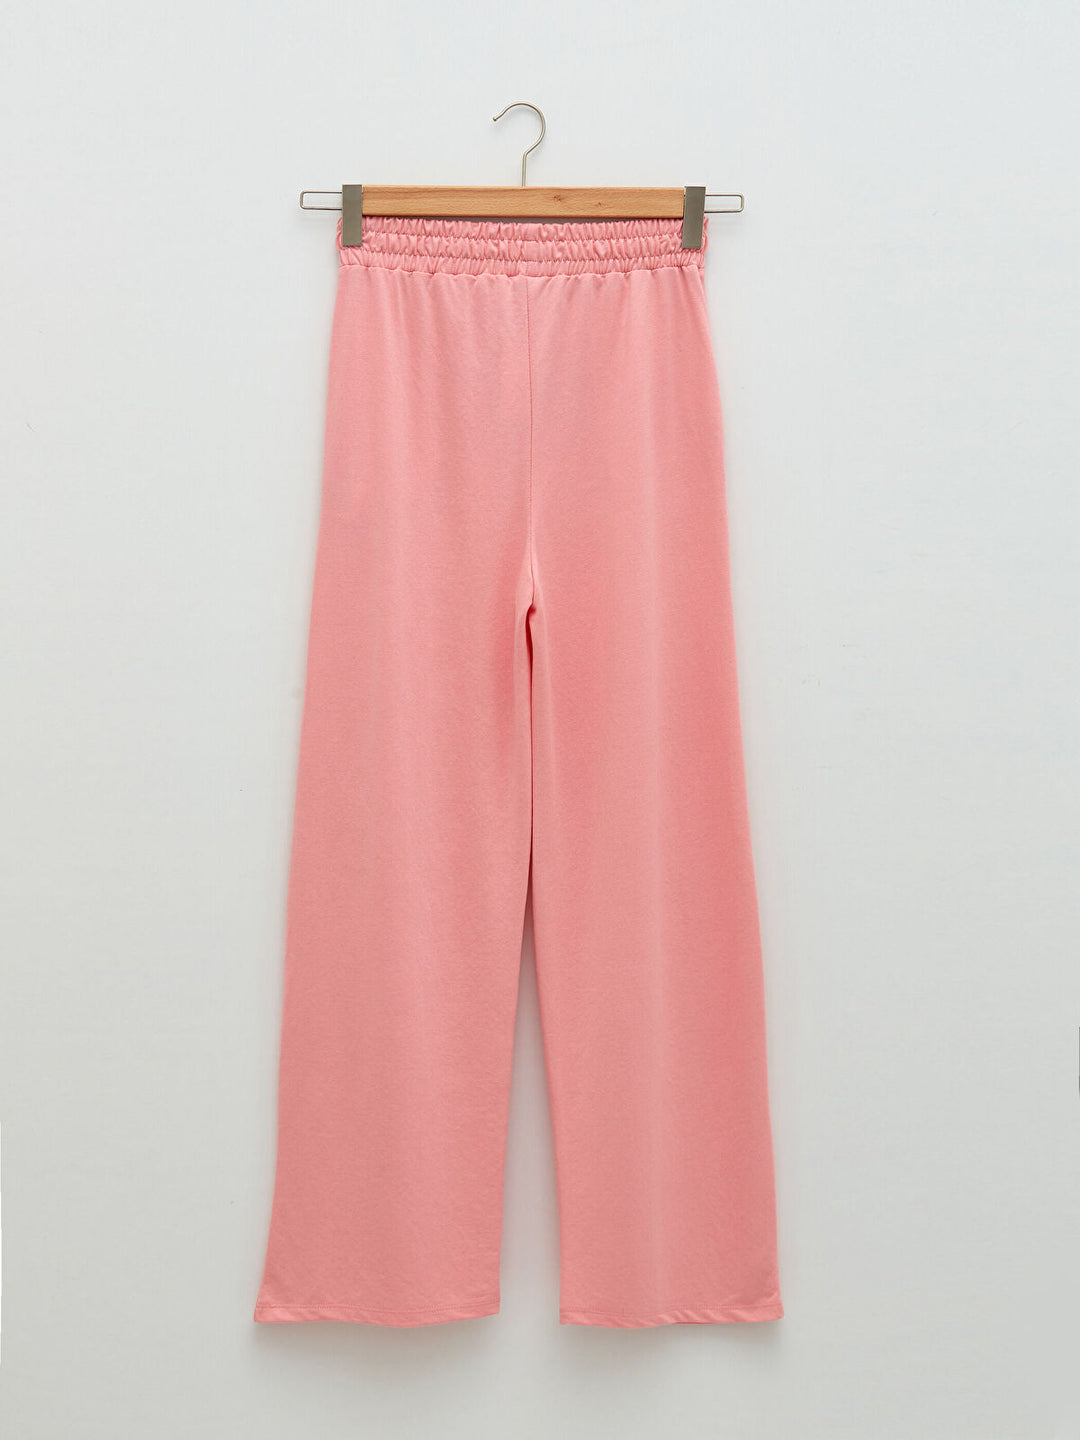 Pink Colored Trousers For Ladies